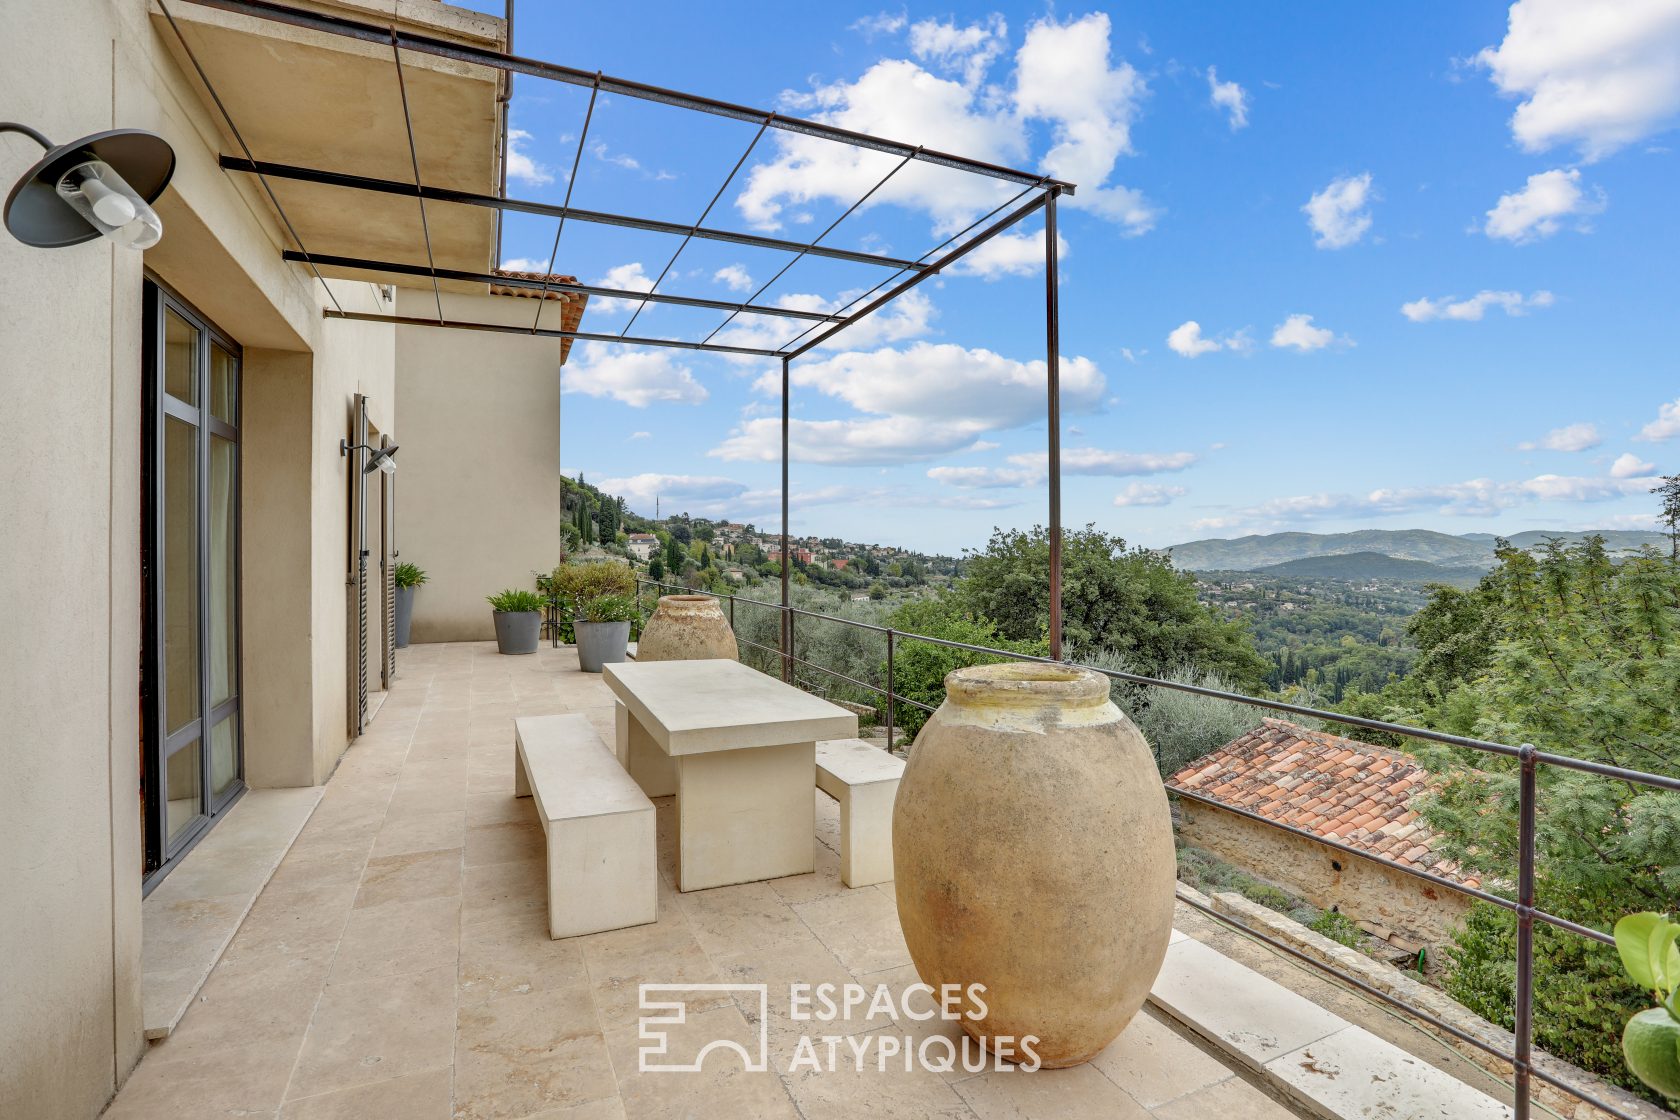 Provencal estate with stone terraces and swimming pools